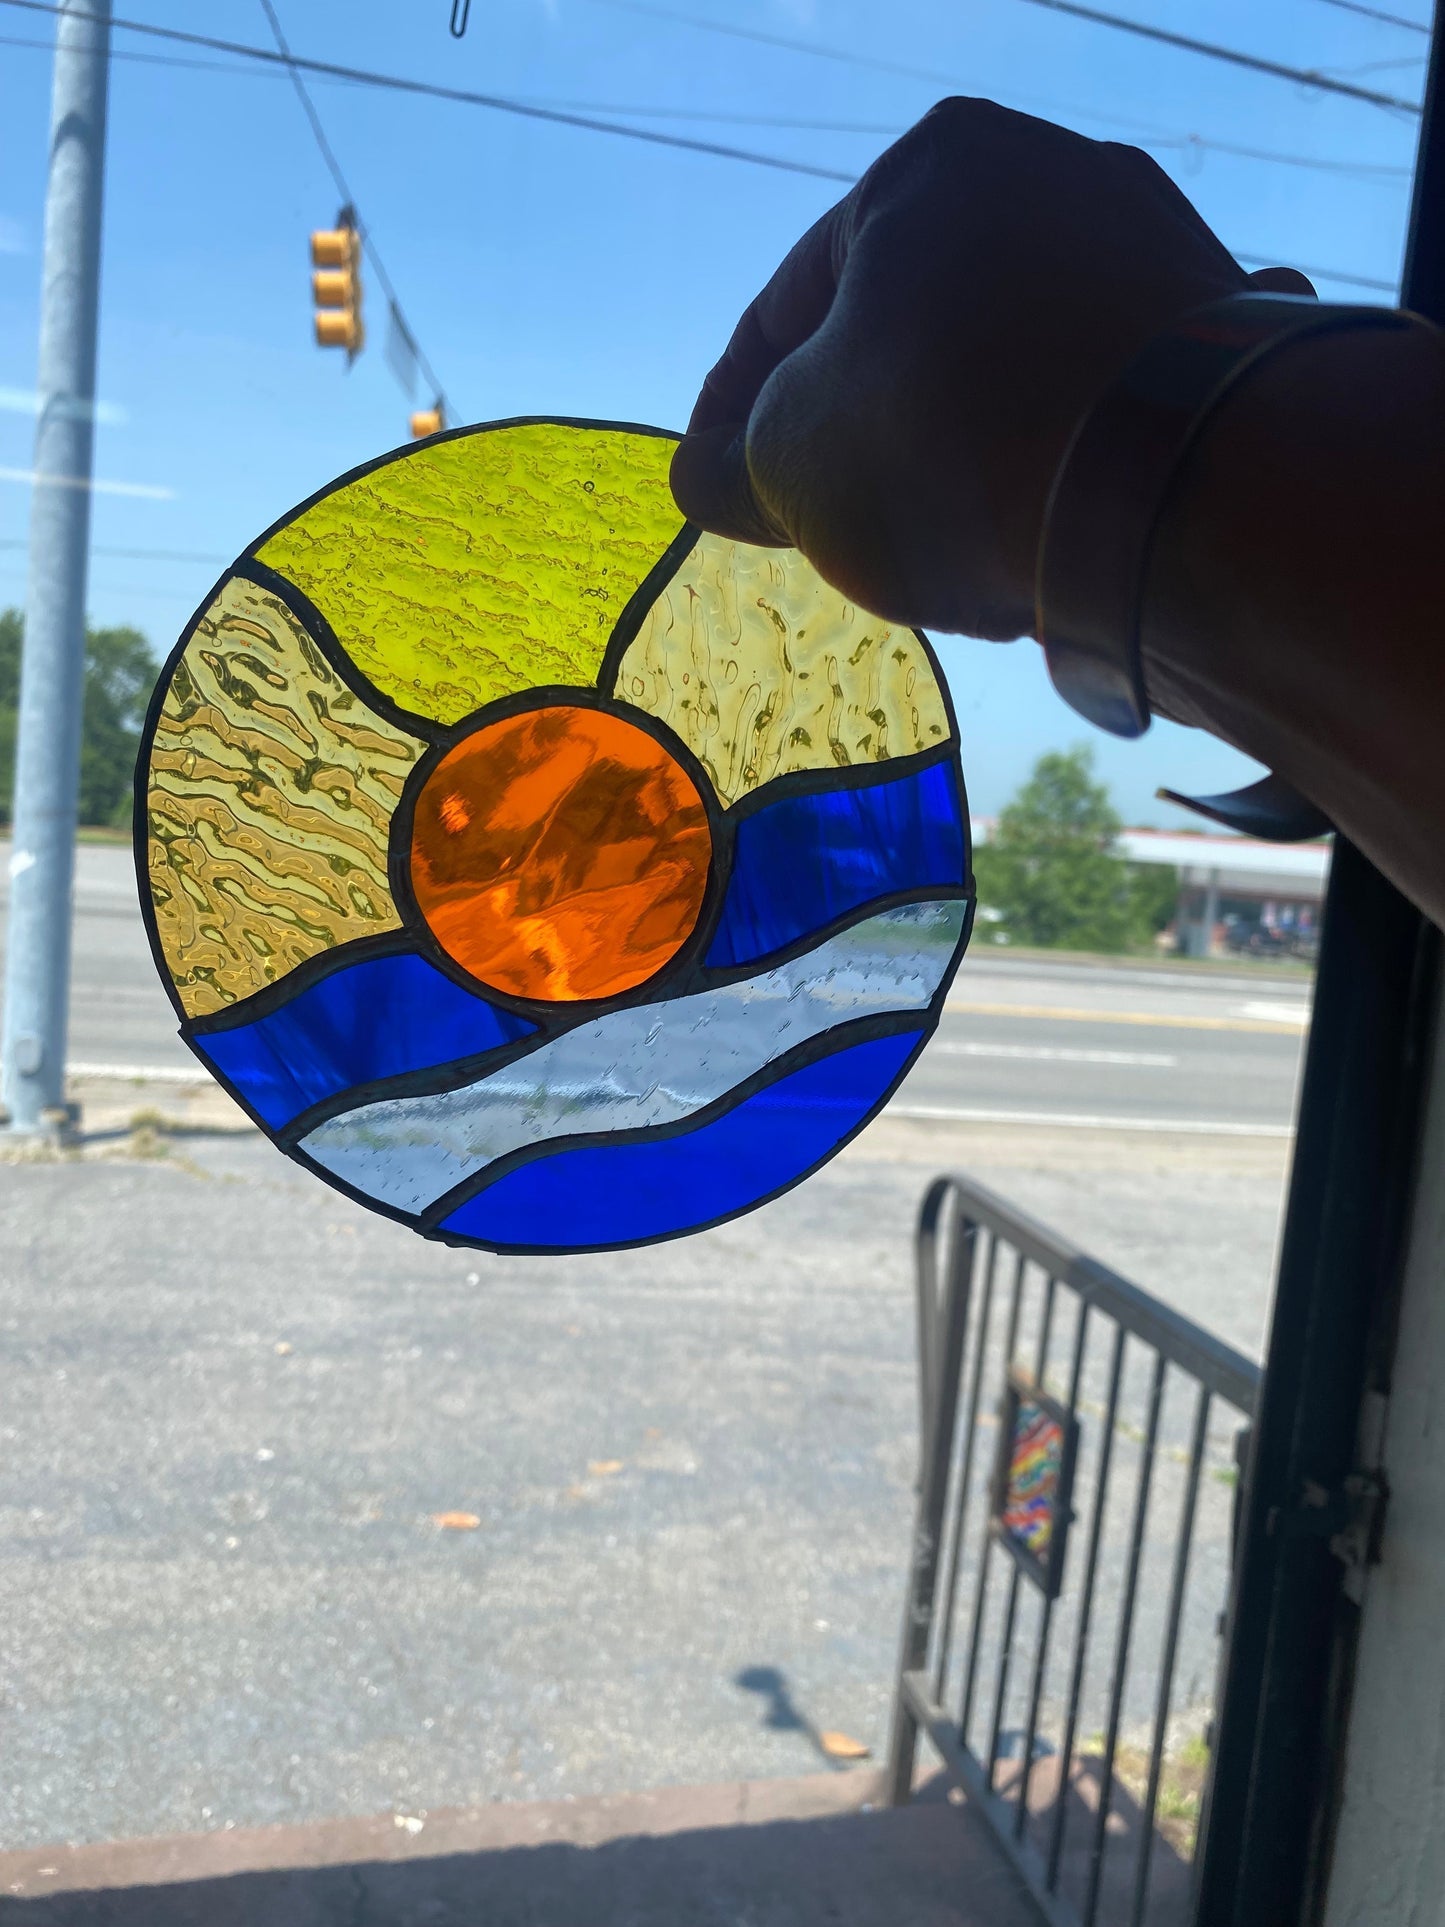 Beginner Stained Glass class, April 11, 11-1:30 pm